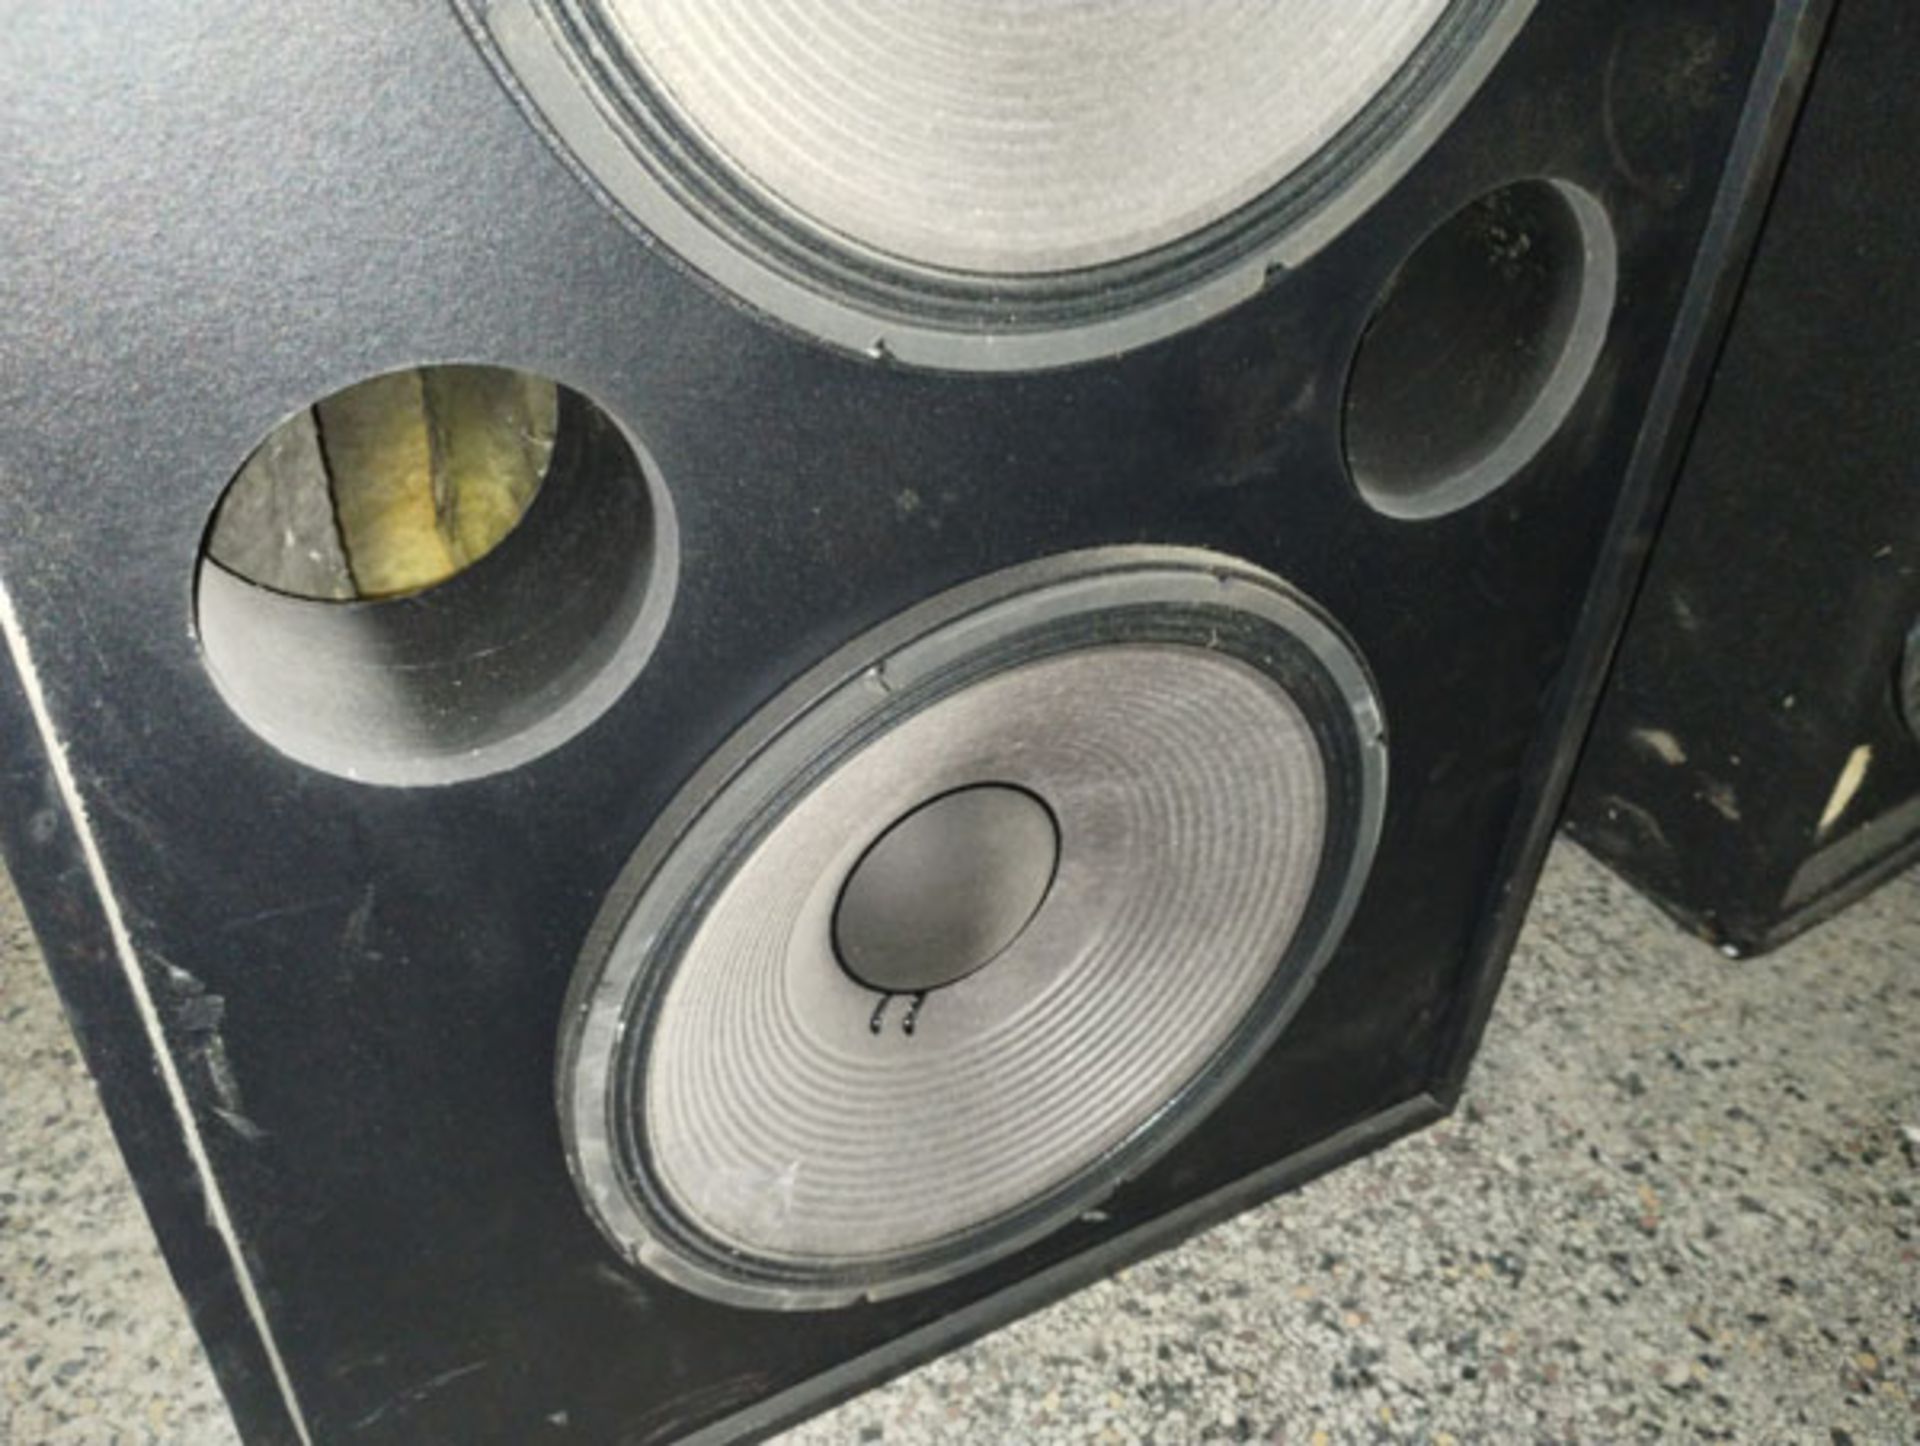 JBL PROFESSIONAL SERIES MODEL: 4648TH 15" SUBWOOFER - 26x18x39" TOTAL DIMENSIONS - Image 4 of 7